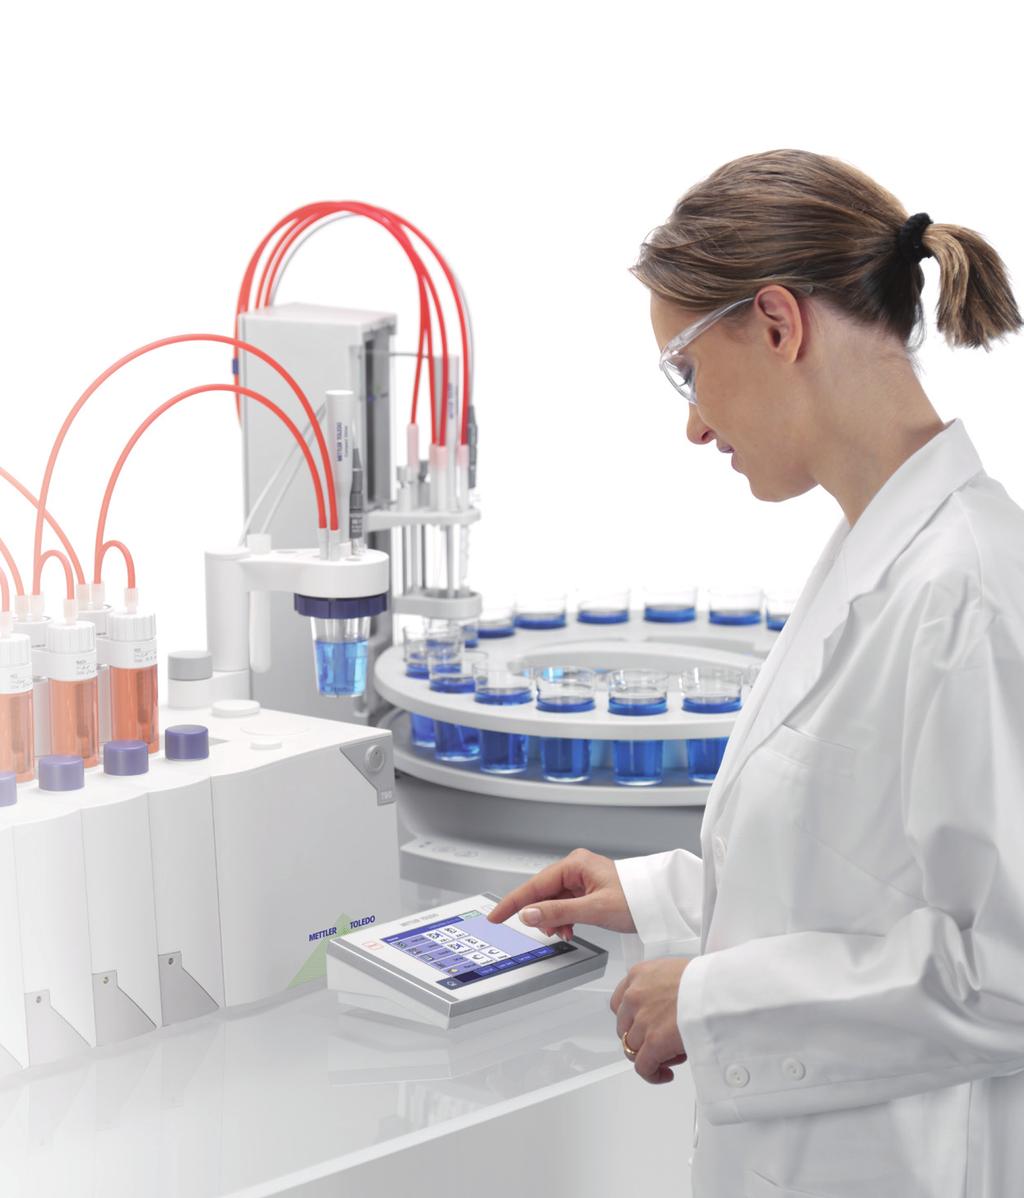 The satisfaction of being able to organize complex tasks efficiently With the Titration Excellence line, it is easy to organize complex tasks efficiently.